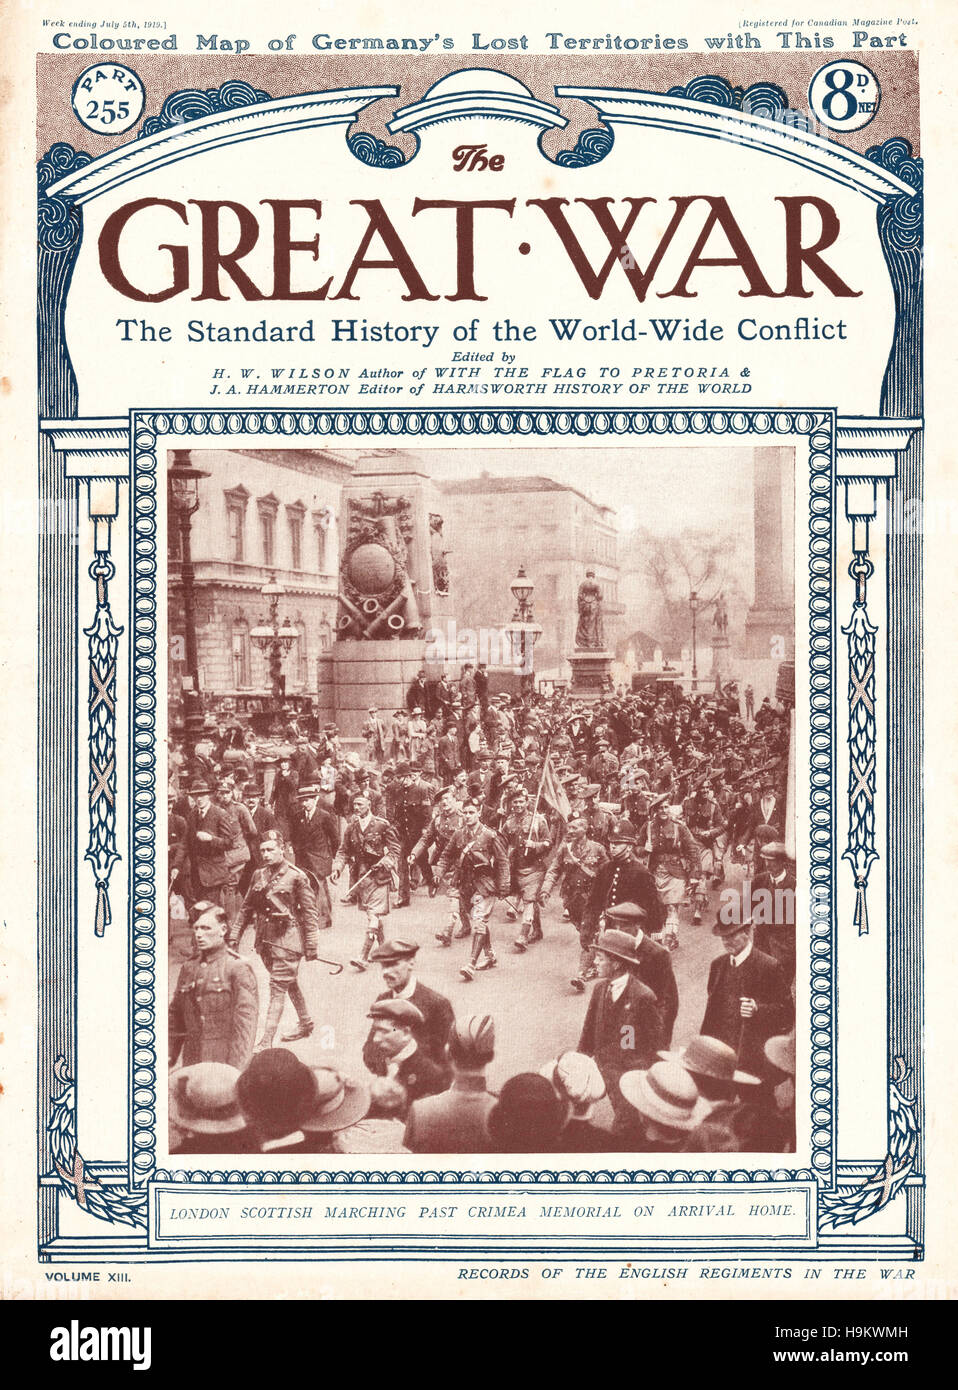 1919 The Great War front page London Scottish march past Crimea Memorial Stock Photo